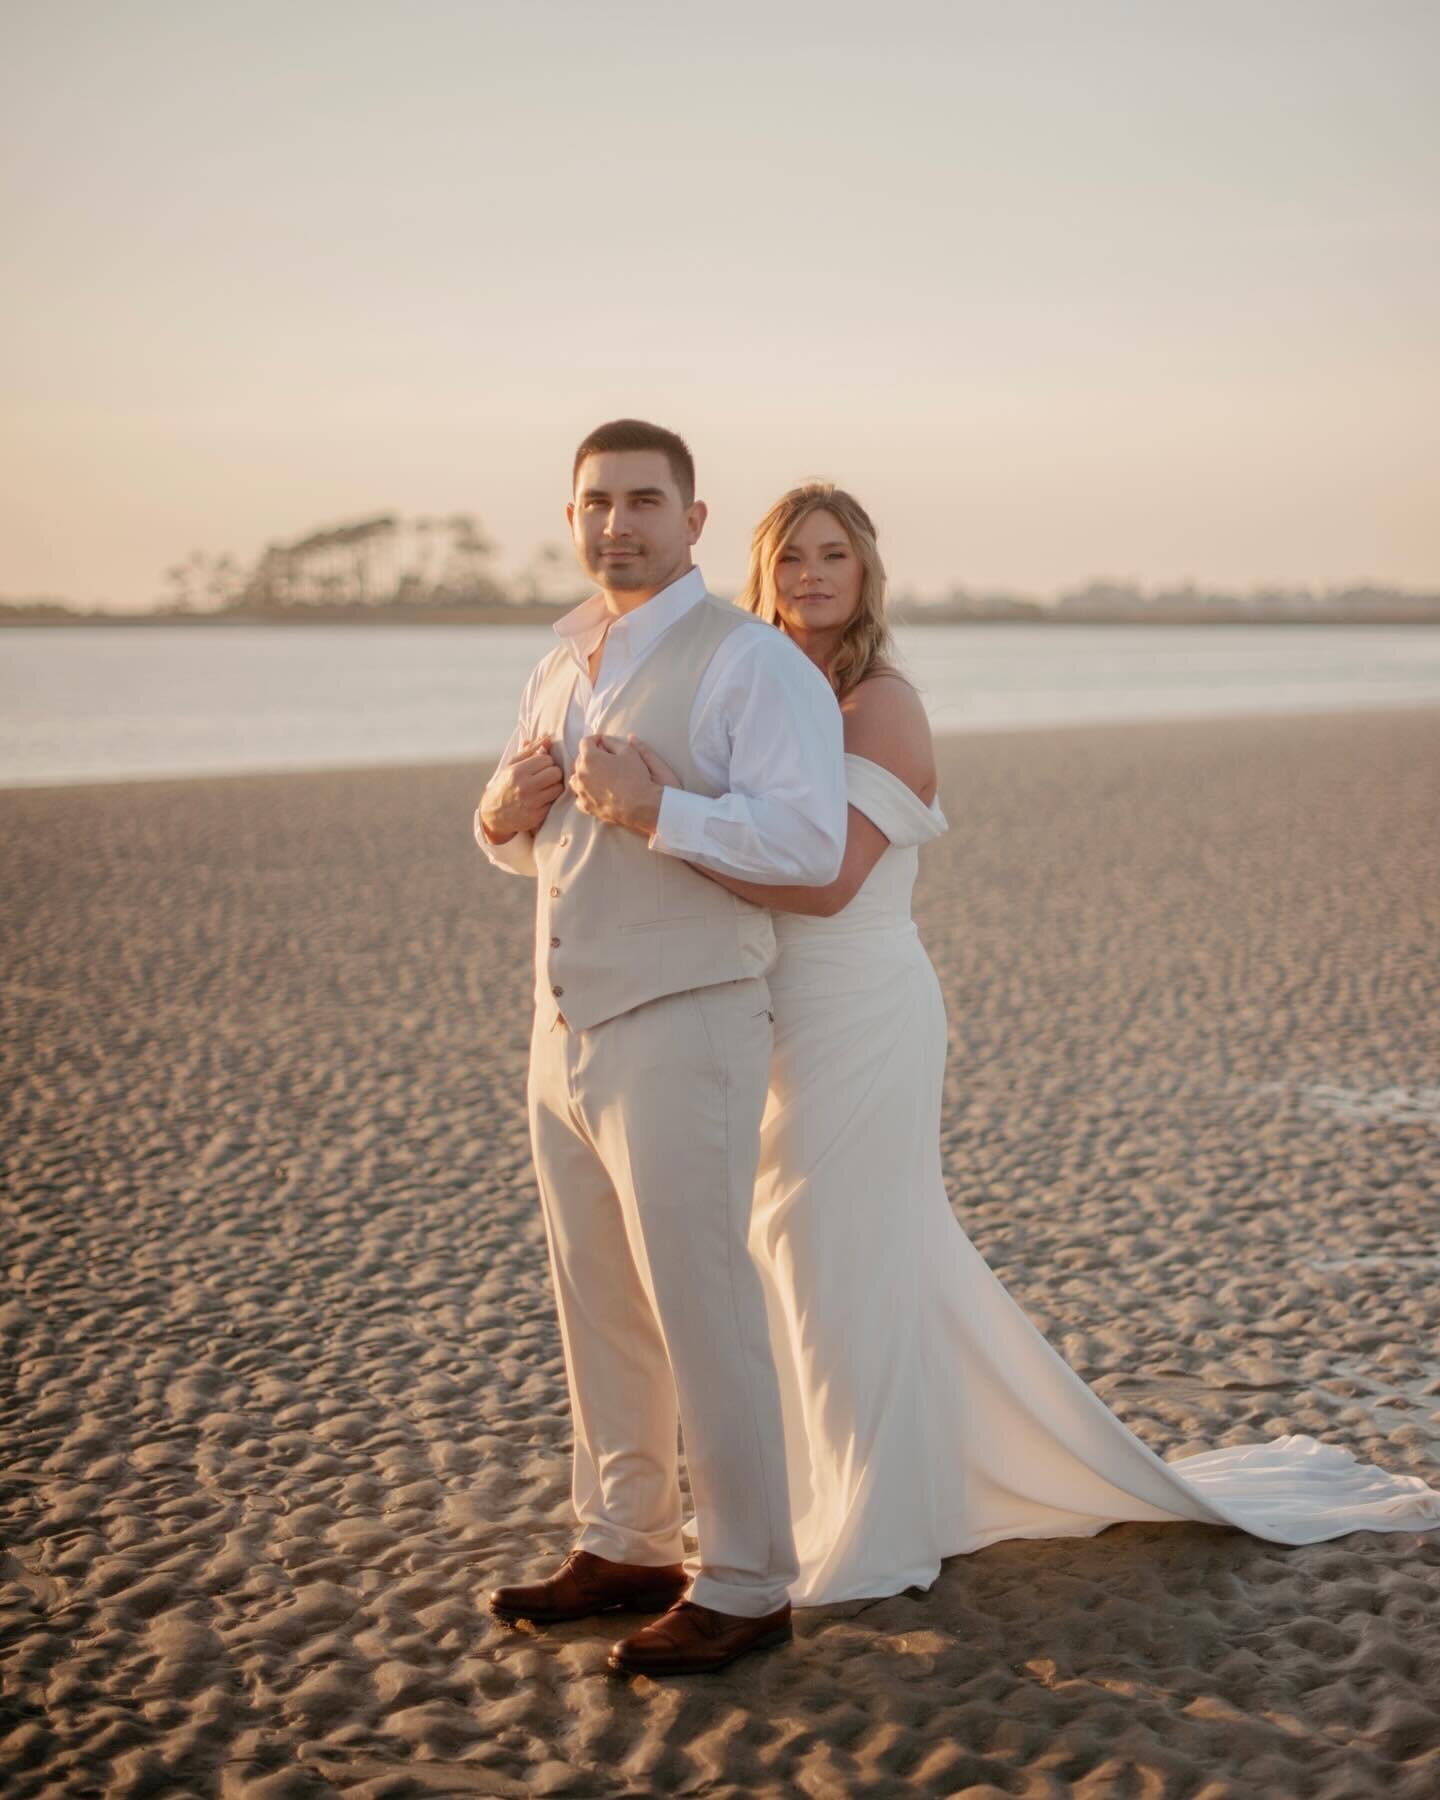 Some first favorites of Patricia &amp; Cody&rsquo;s Tybee elopement 💛 The bulk of my couples for the year are this spring &amp; I&rsquo;d say it&rsquo;s going beautifully. Spring is by far my favorite time of year on the Georgia coast!